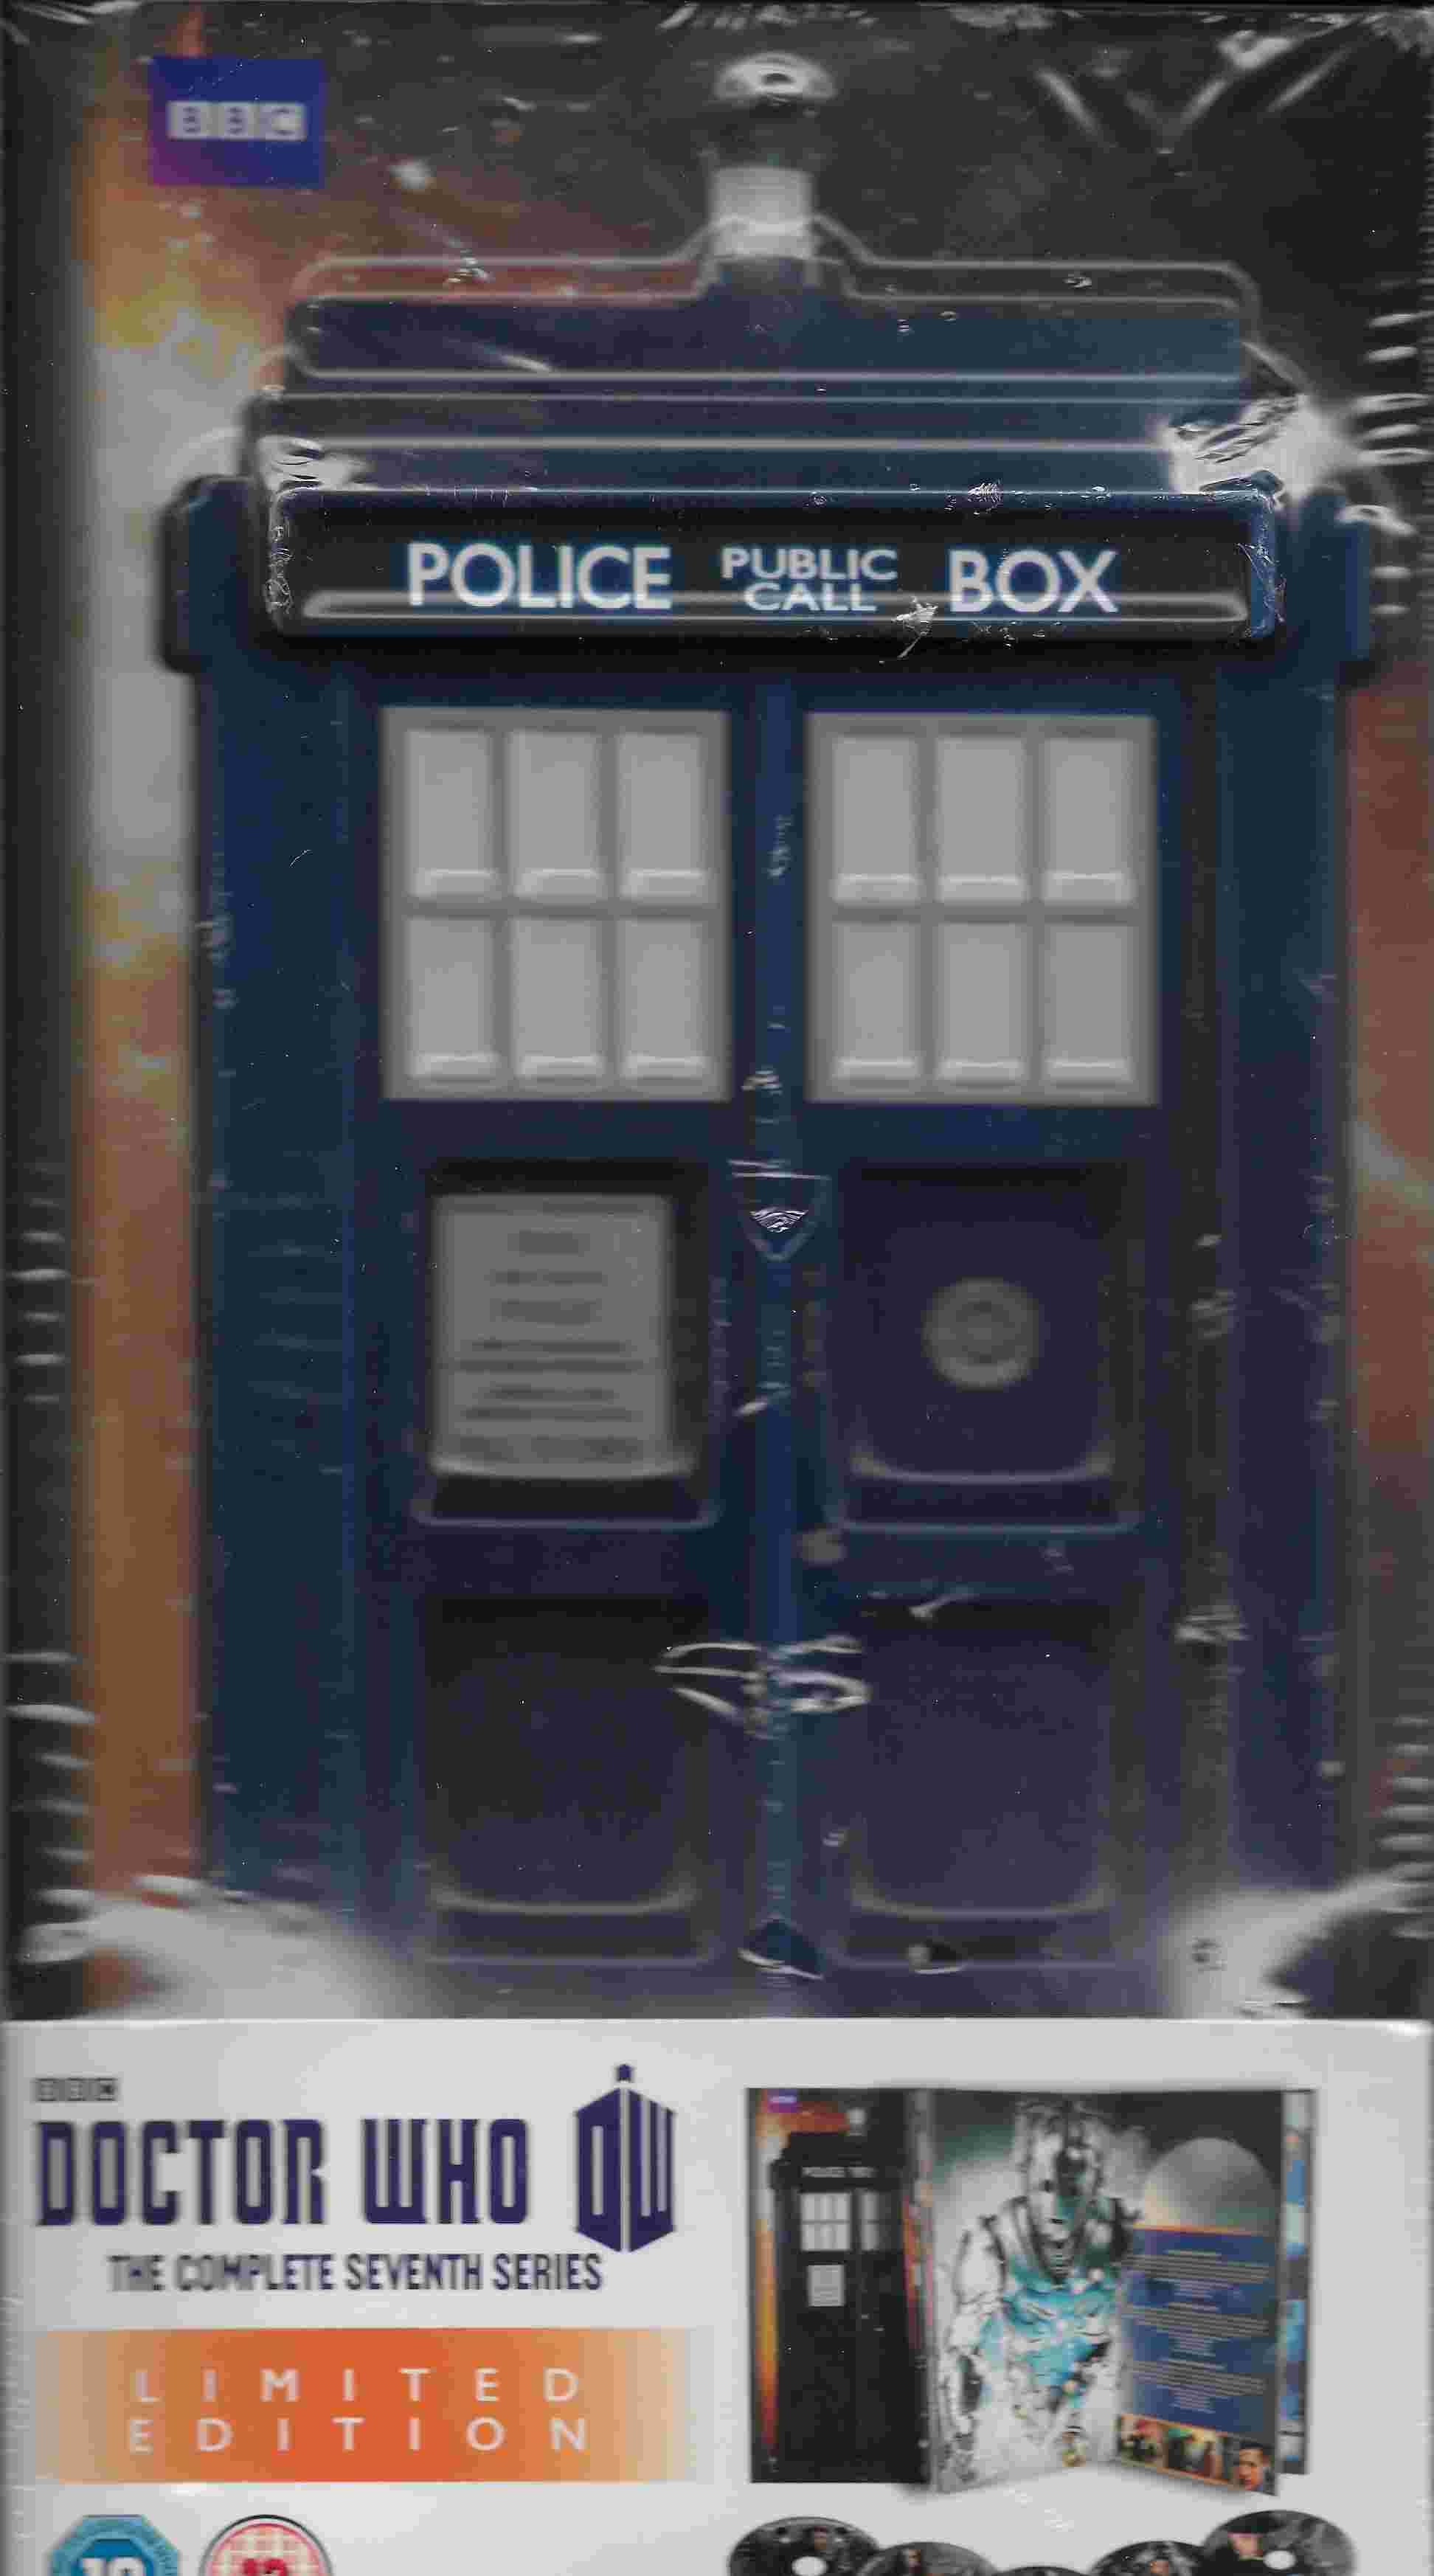 Picture of BBCBD 0251 Doctor Who - Series 7 boxed set by artist Various from the BBC records and Tapes library